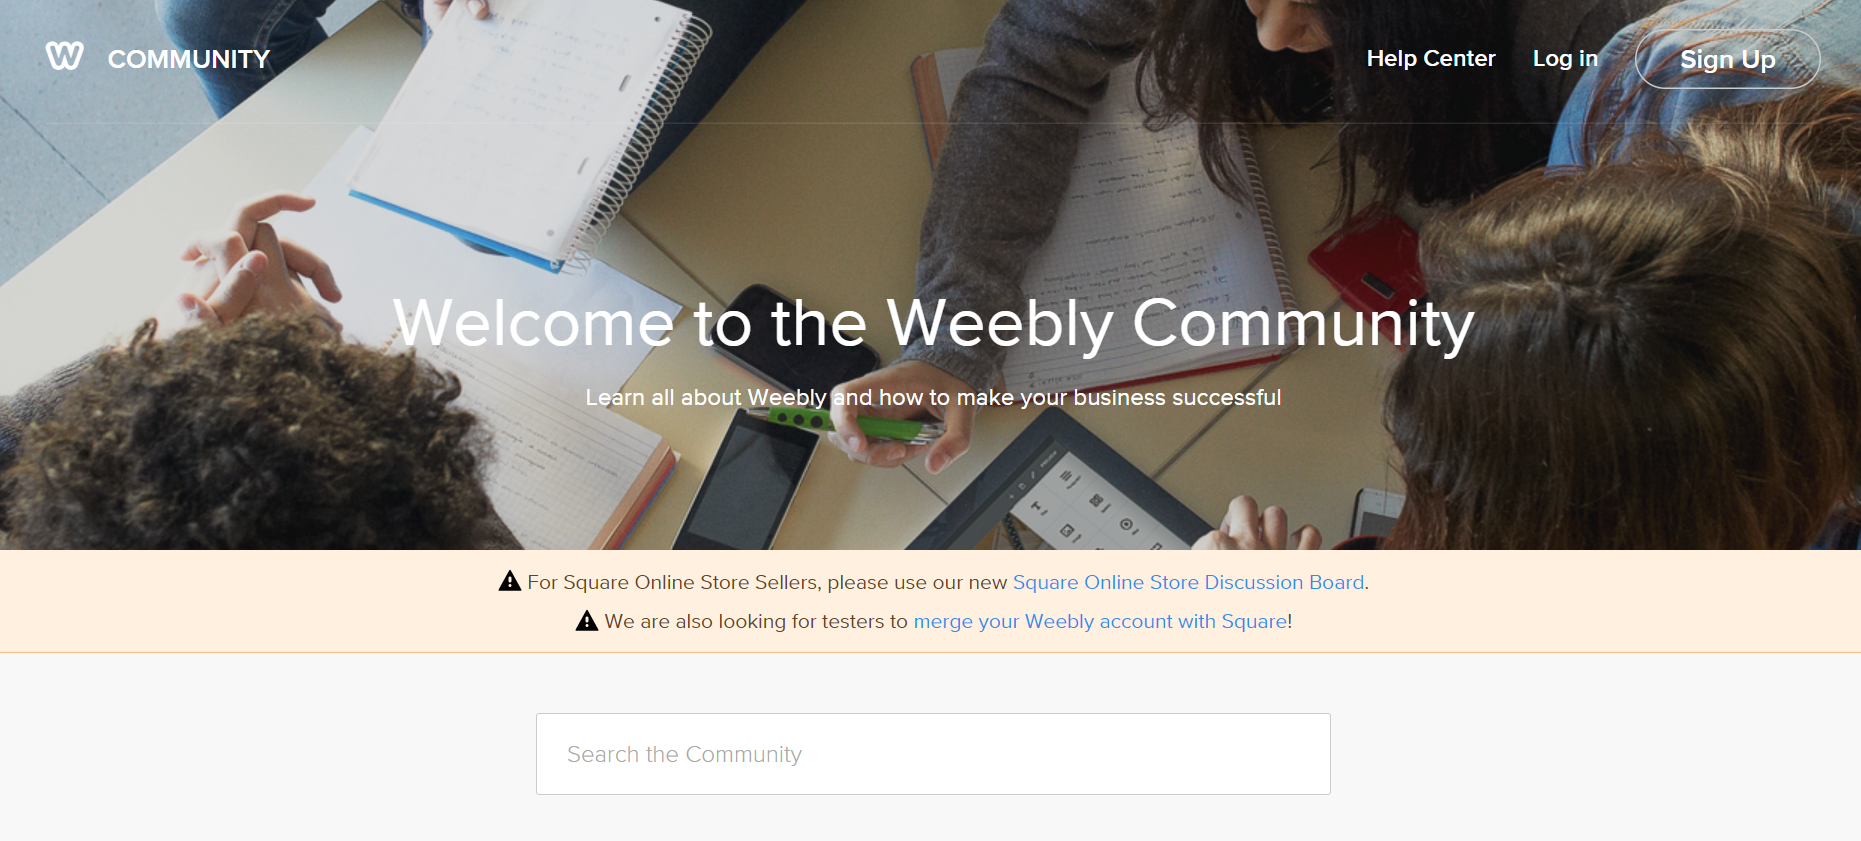 Weebly community